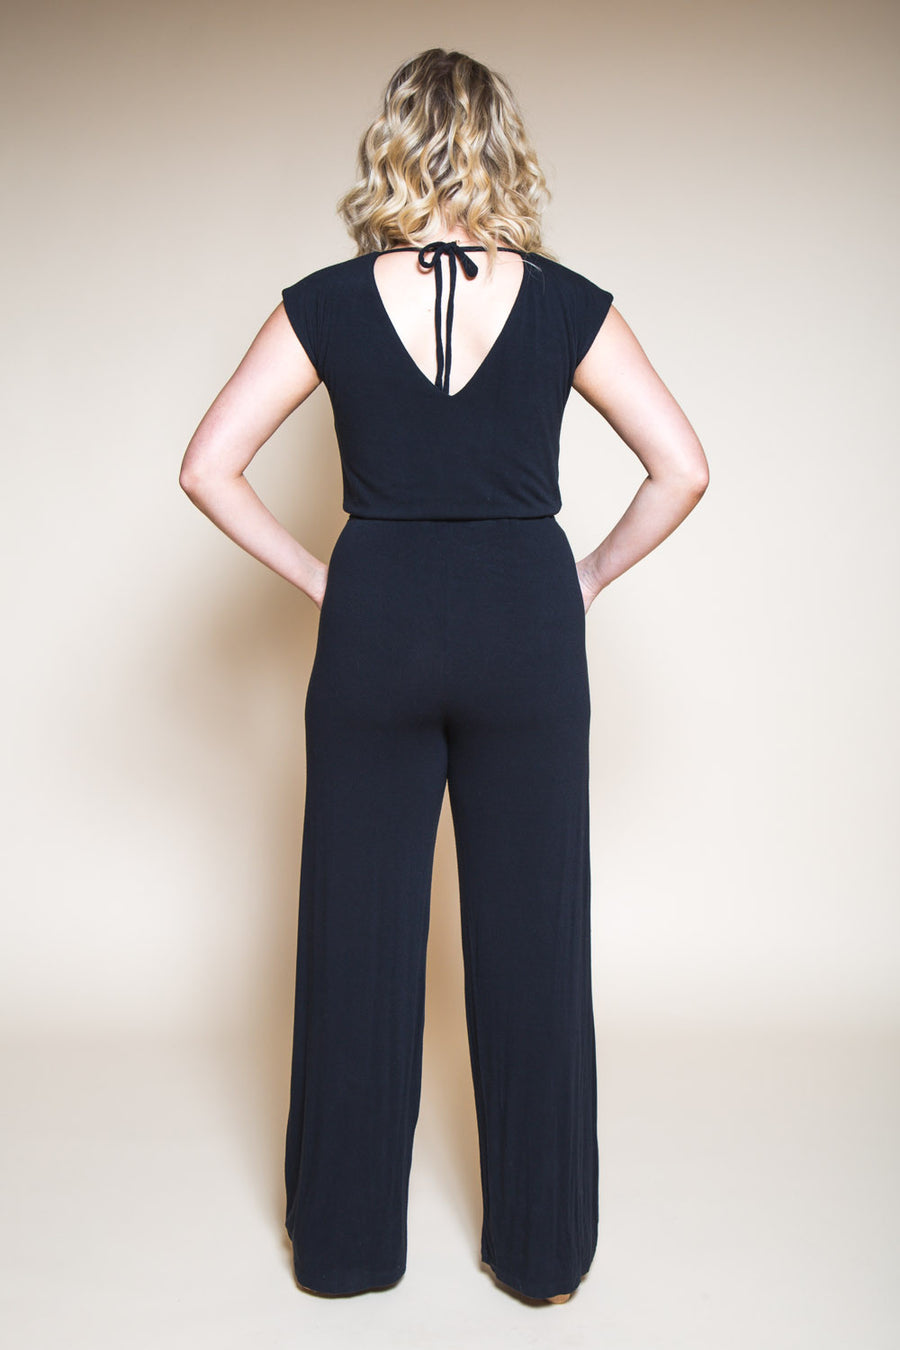 The Best Overalls for Women with Curves - Lipgloss and Crayons